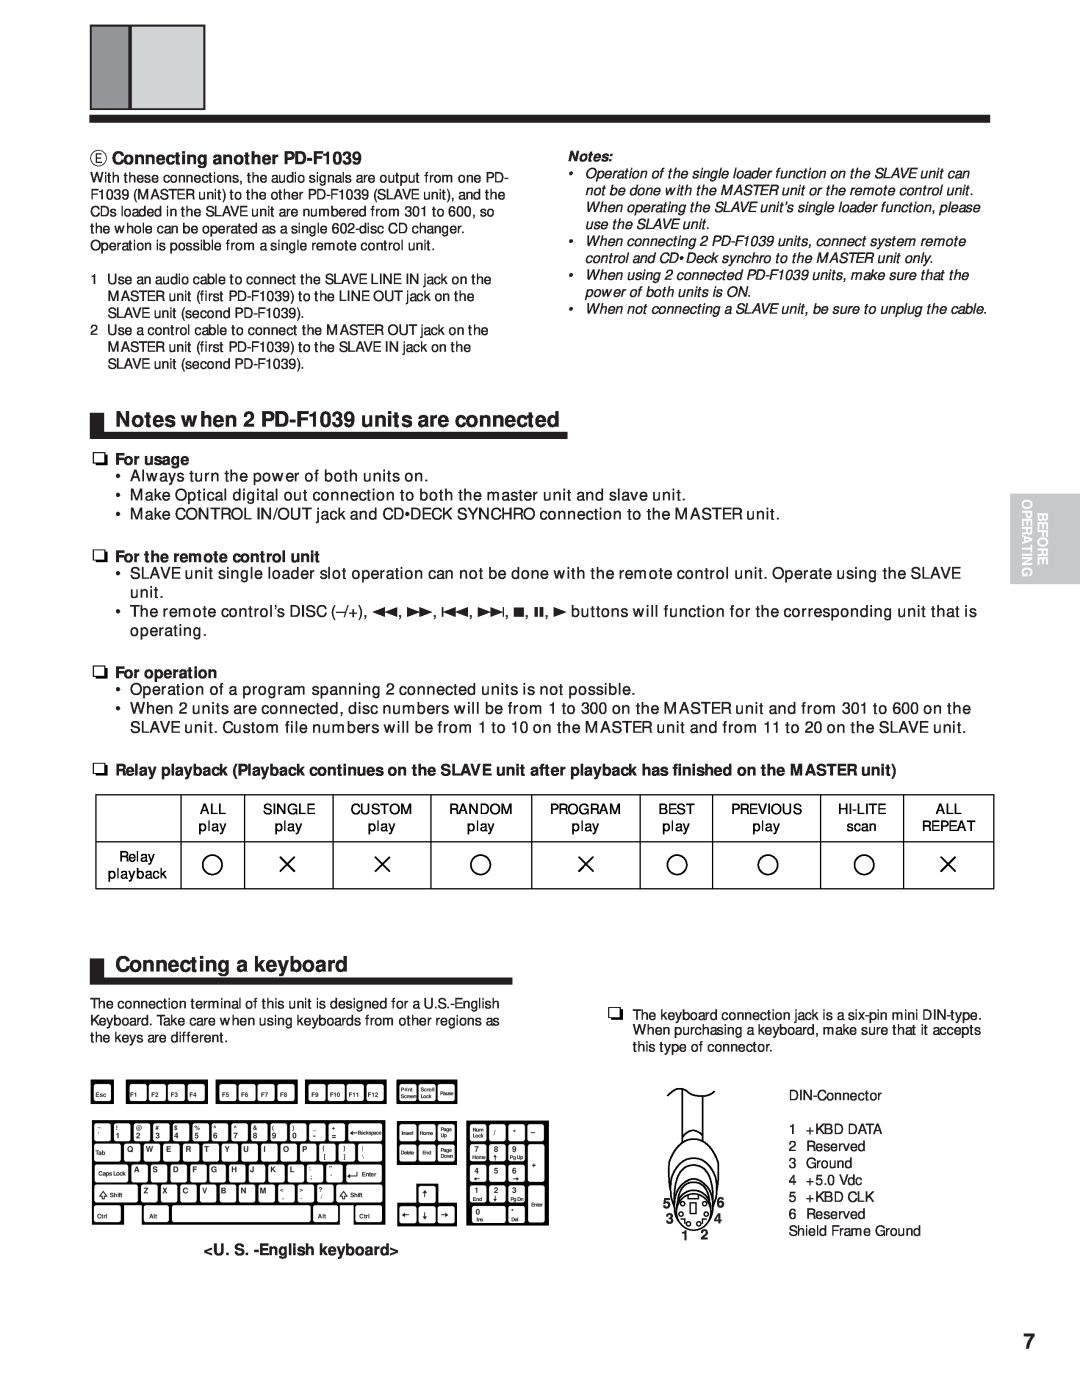 Pioneer manual Notes when 2 PD-F1039units are connected, Connecting a keyboard, For usage, For the remote control unit 